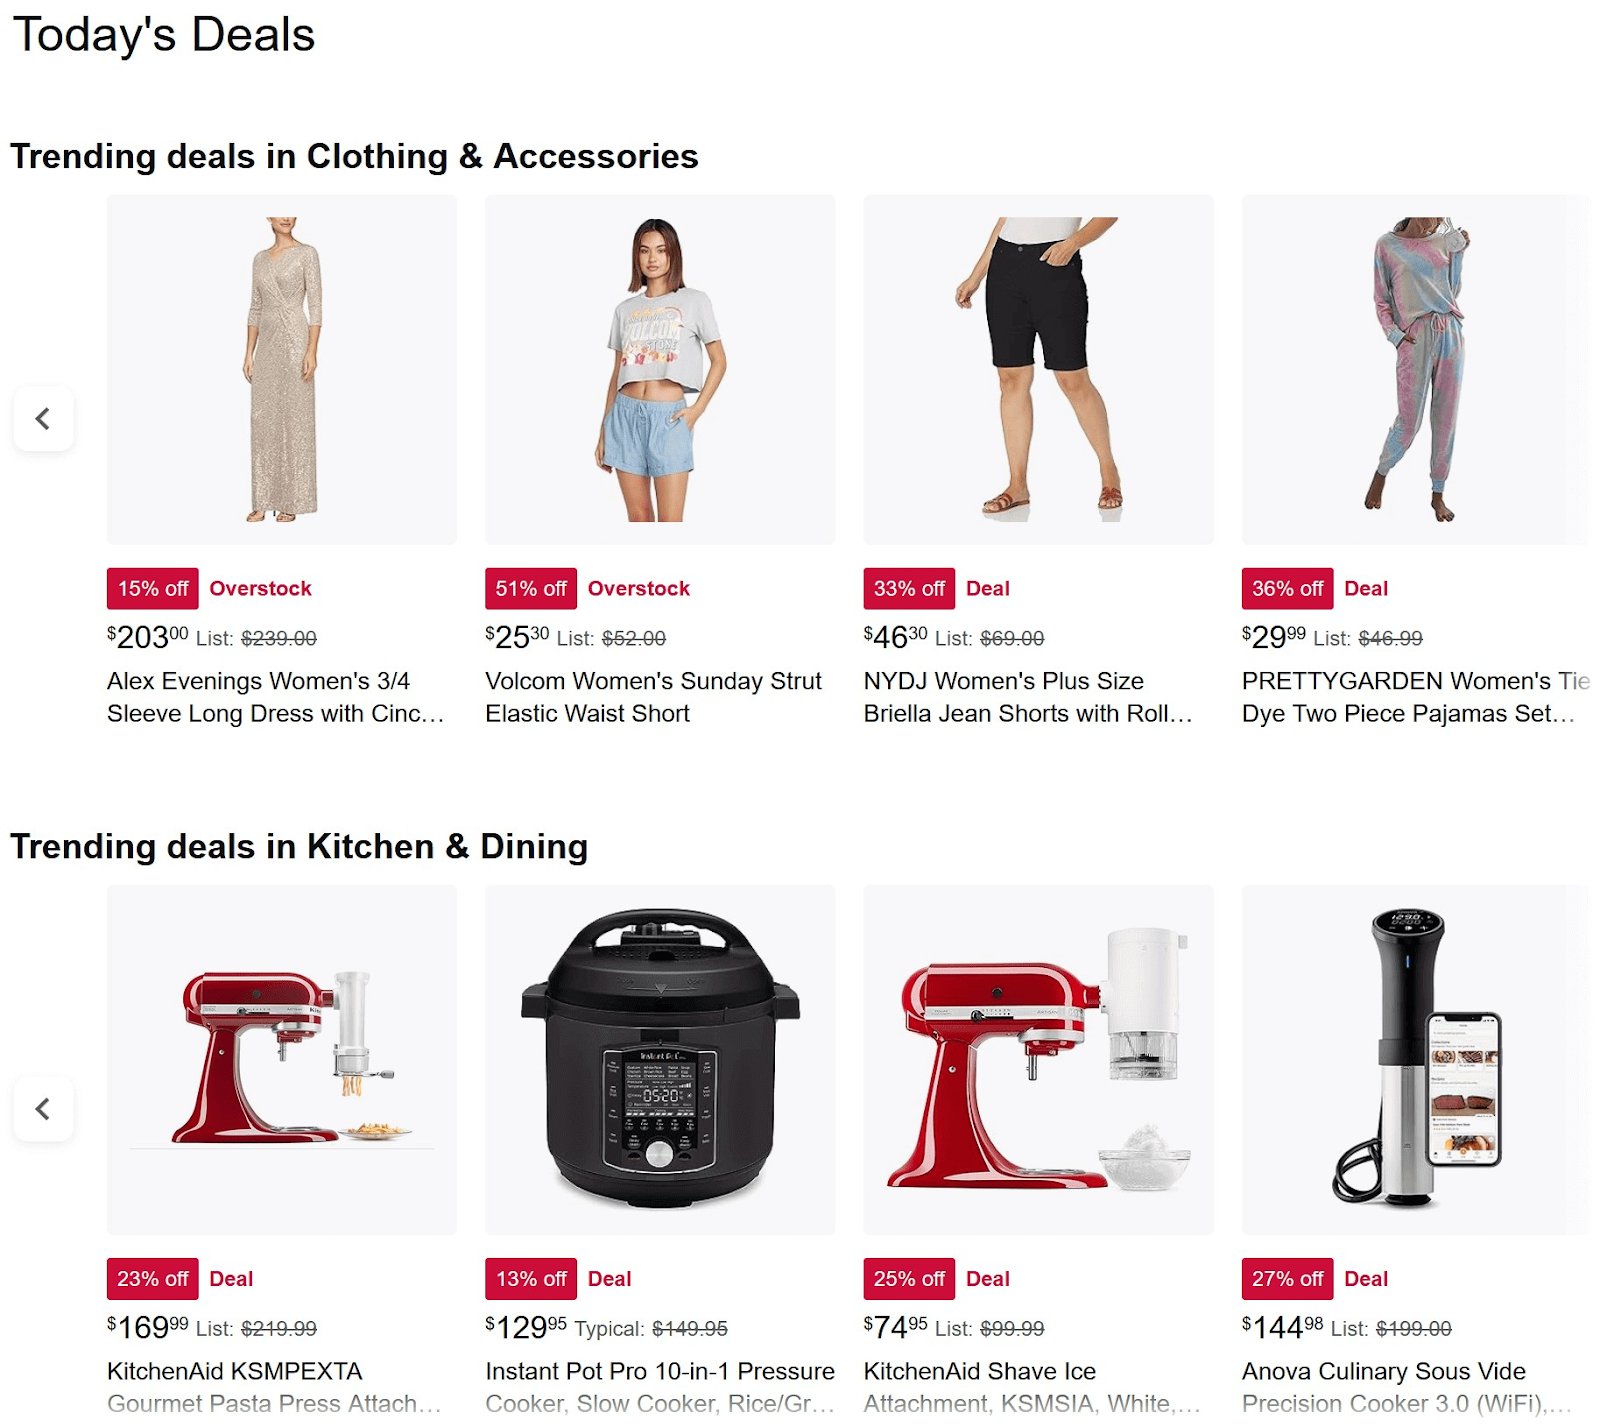 Amazon’s "Today's Deals" page